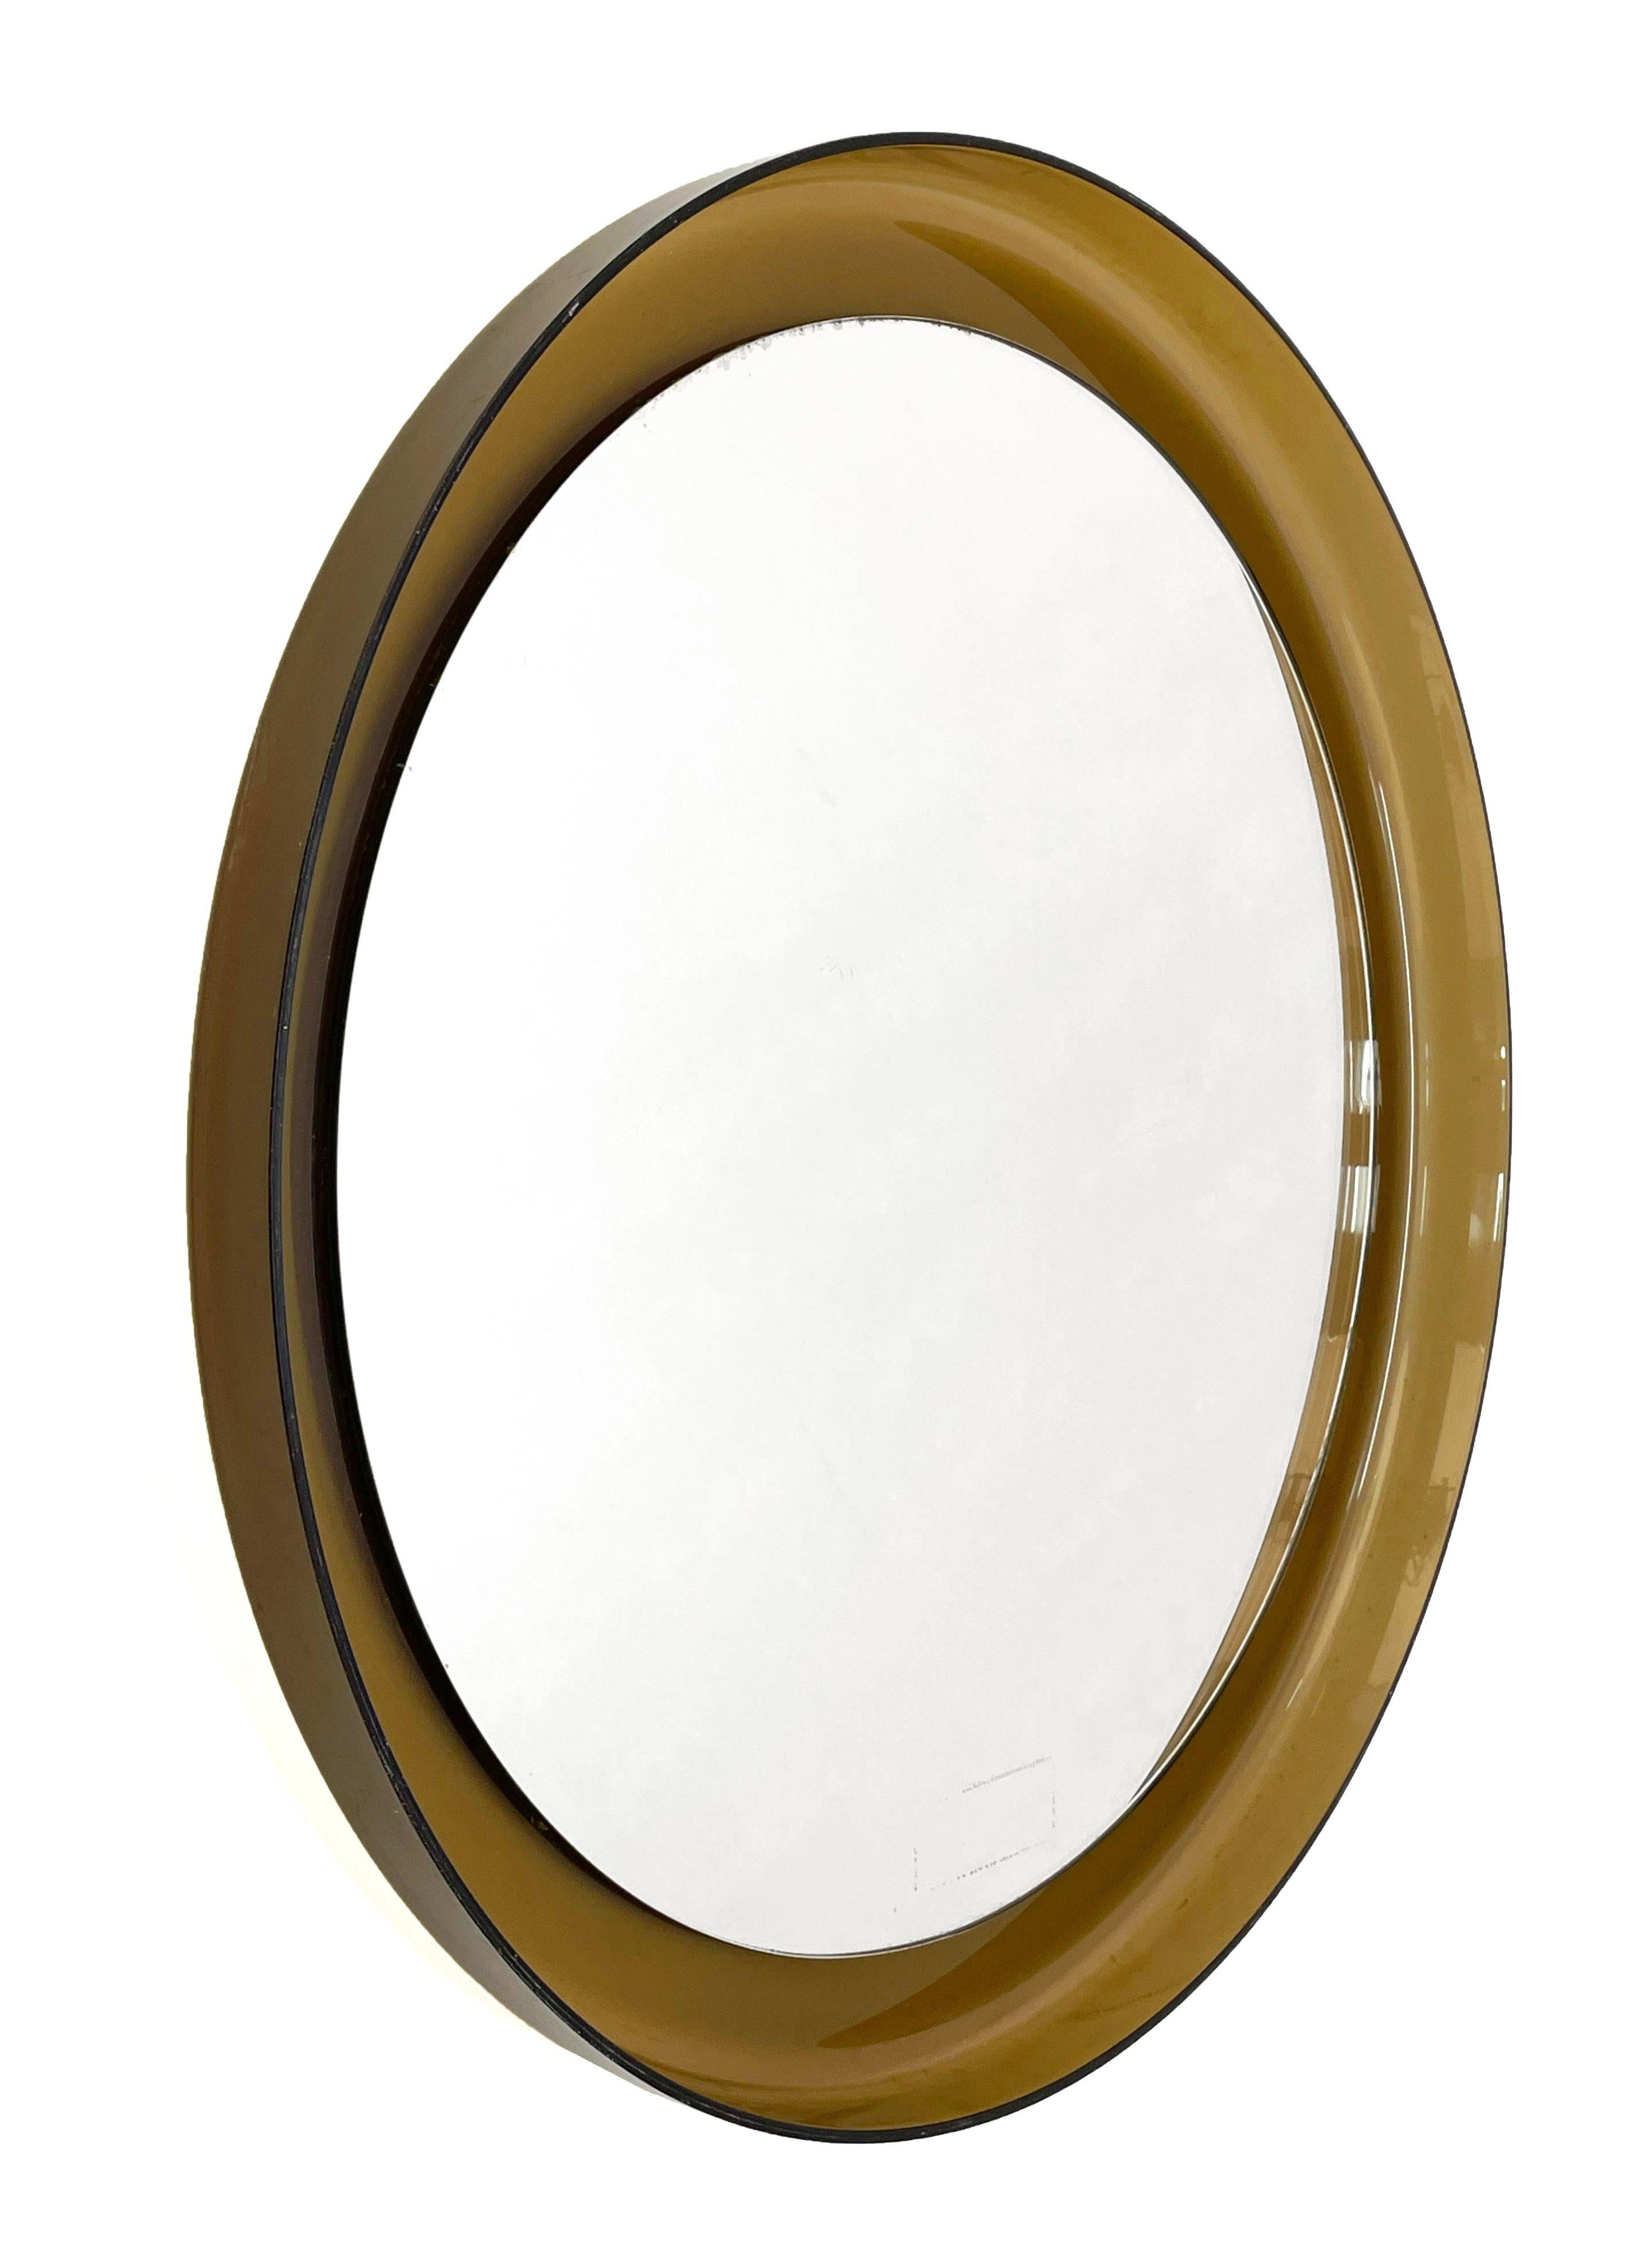 Midcentury Guzzini Italian Round Lucite Smoked Brown Wall Mirror, 1960s For Sale 4